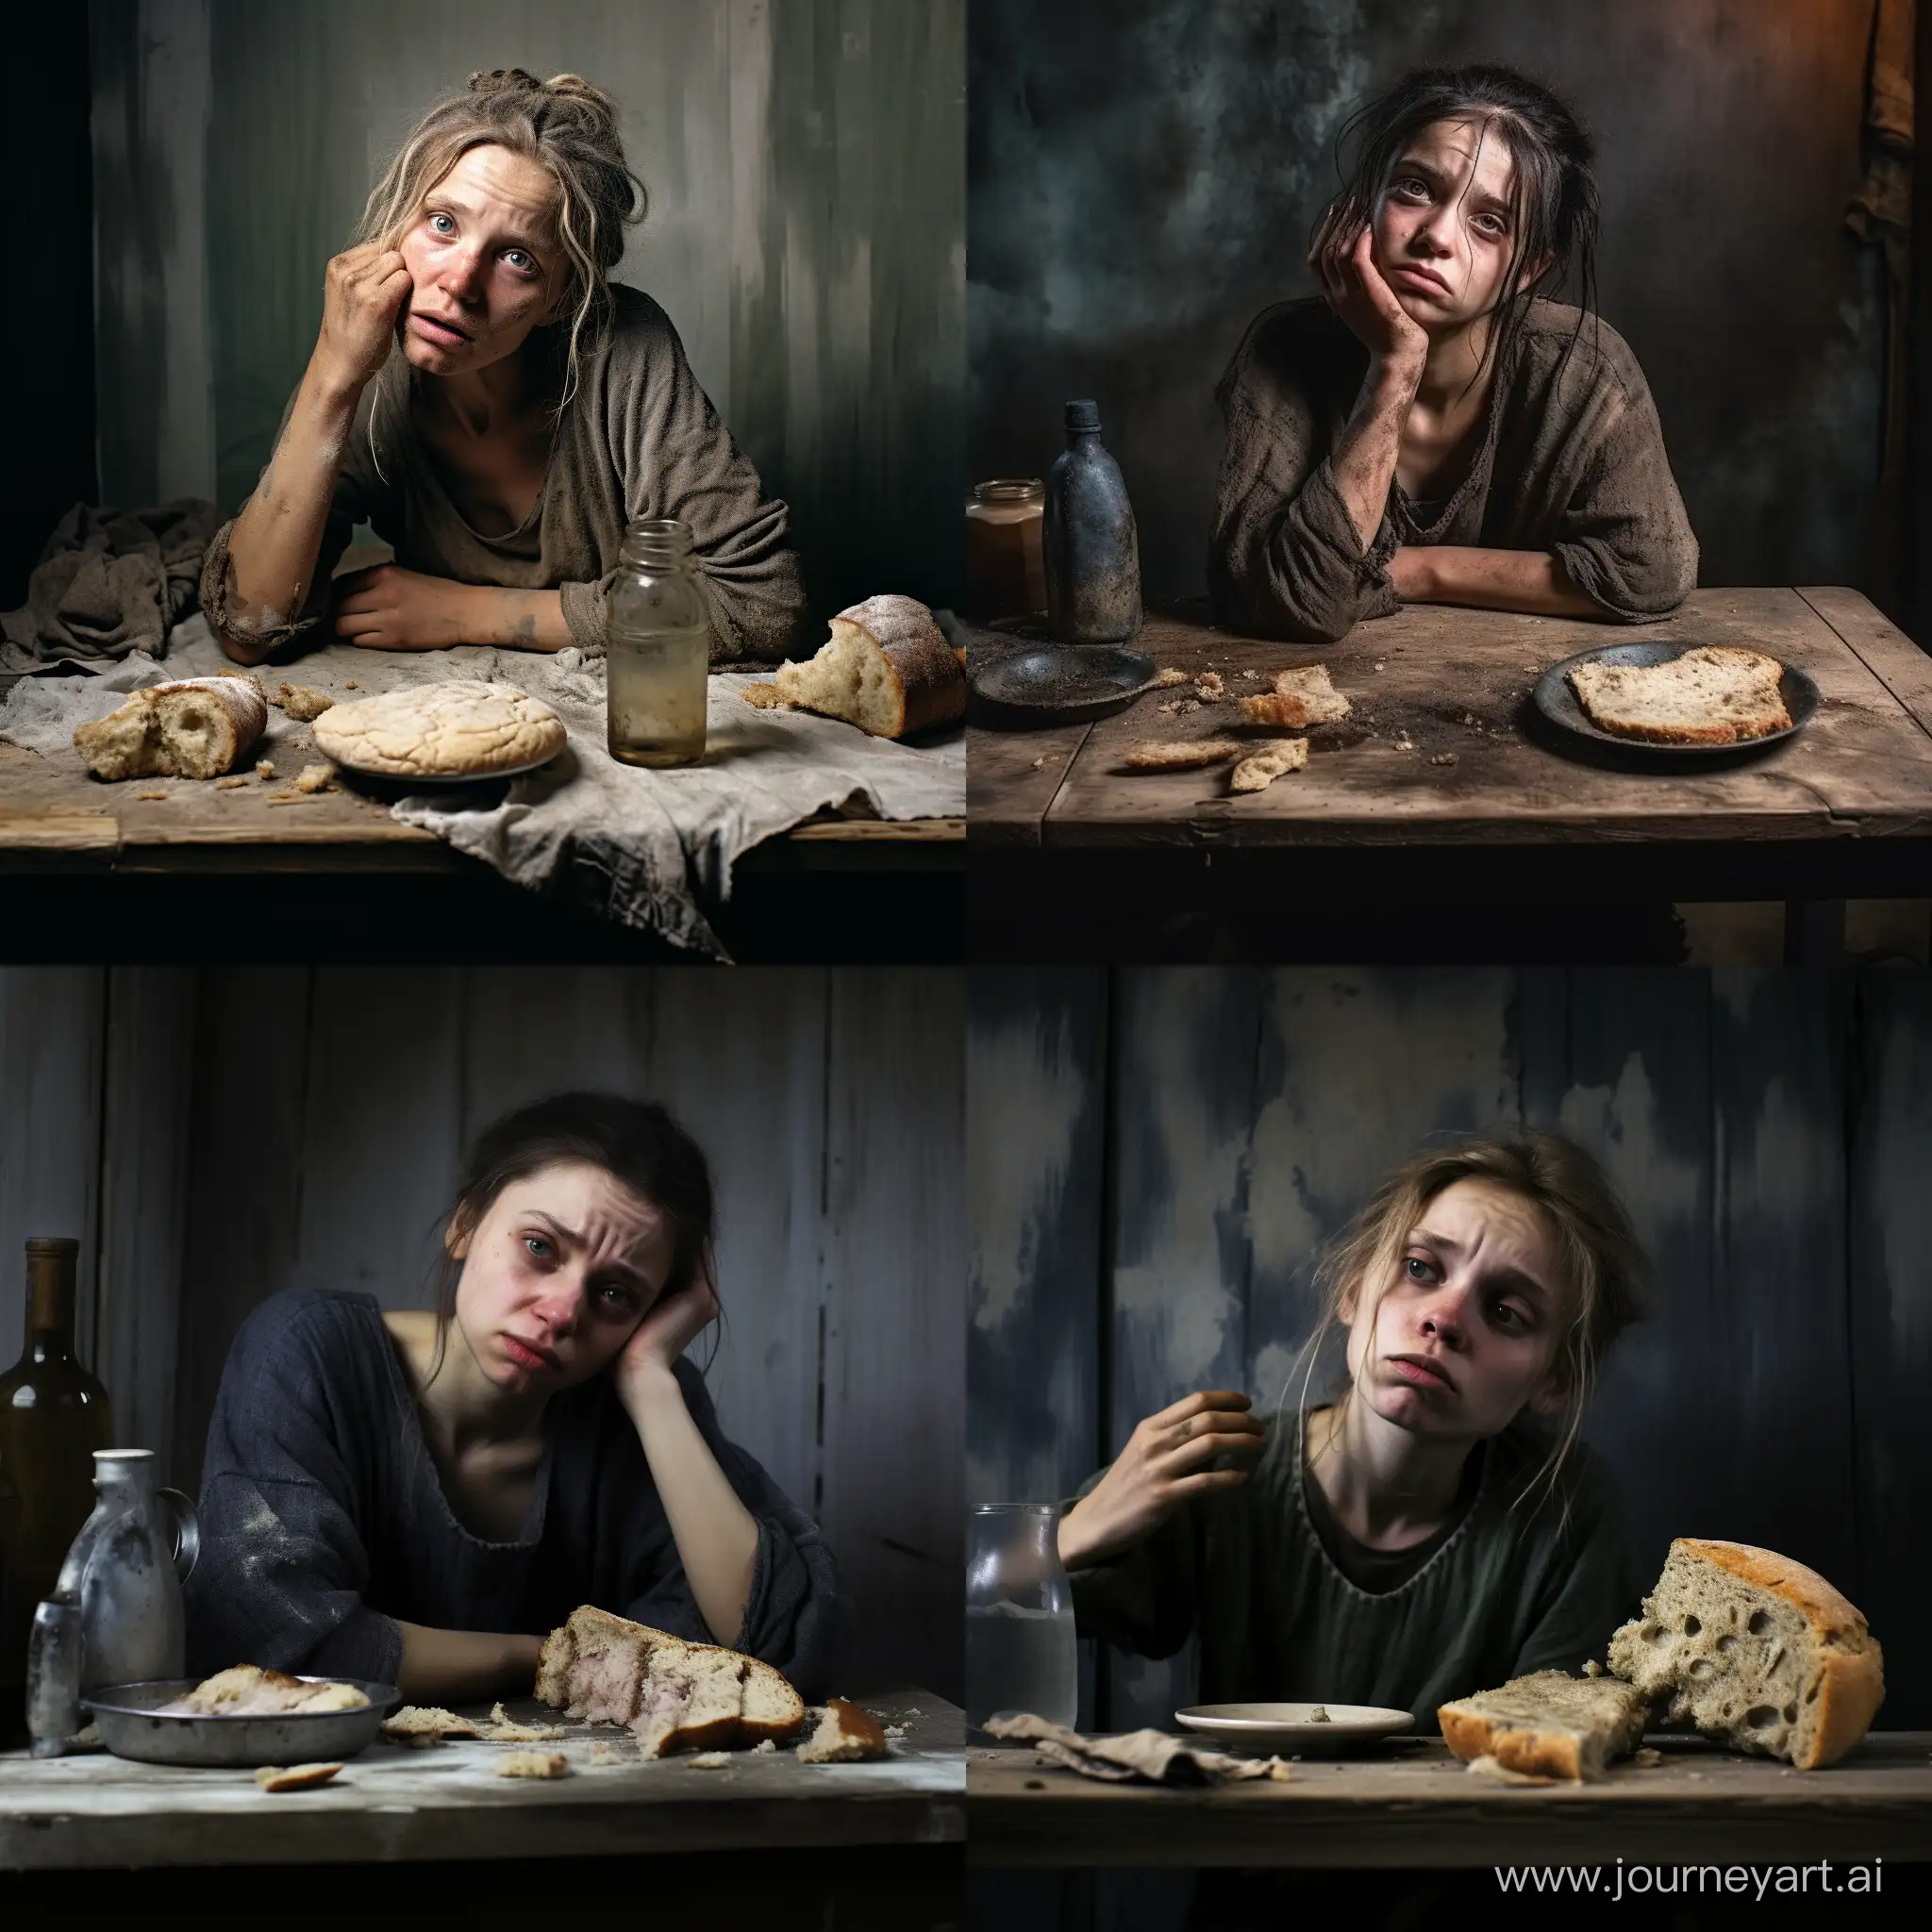 Sorrowful-Girl-in-Dilapidated-Kitchen-with-Moldy-Bread-Hyperrealistic-Photography